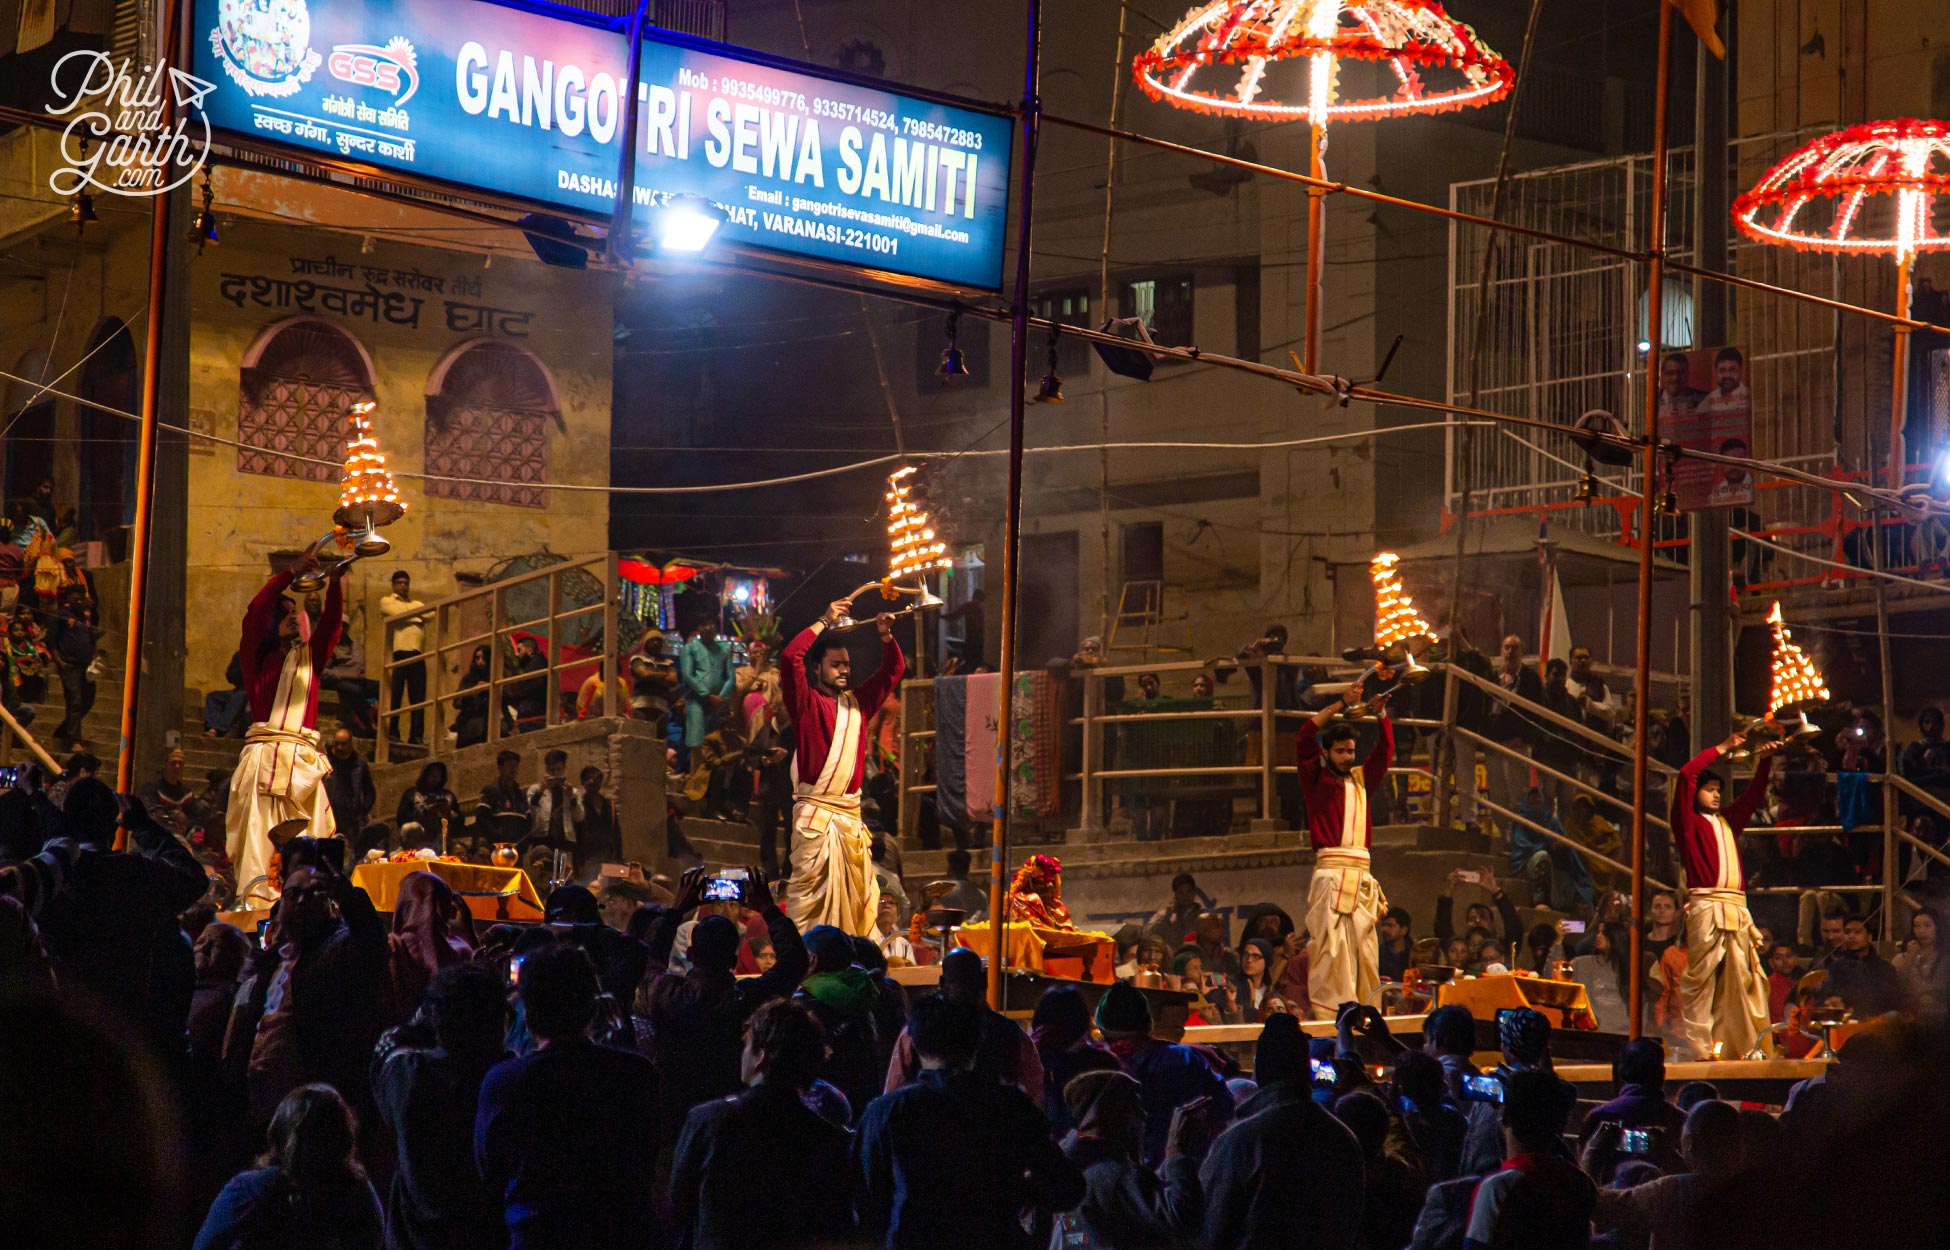 The Ganga Aarti is performed every night on the Dashashwamedh Ghat